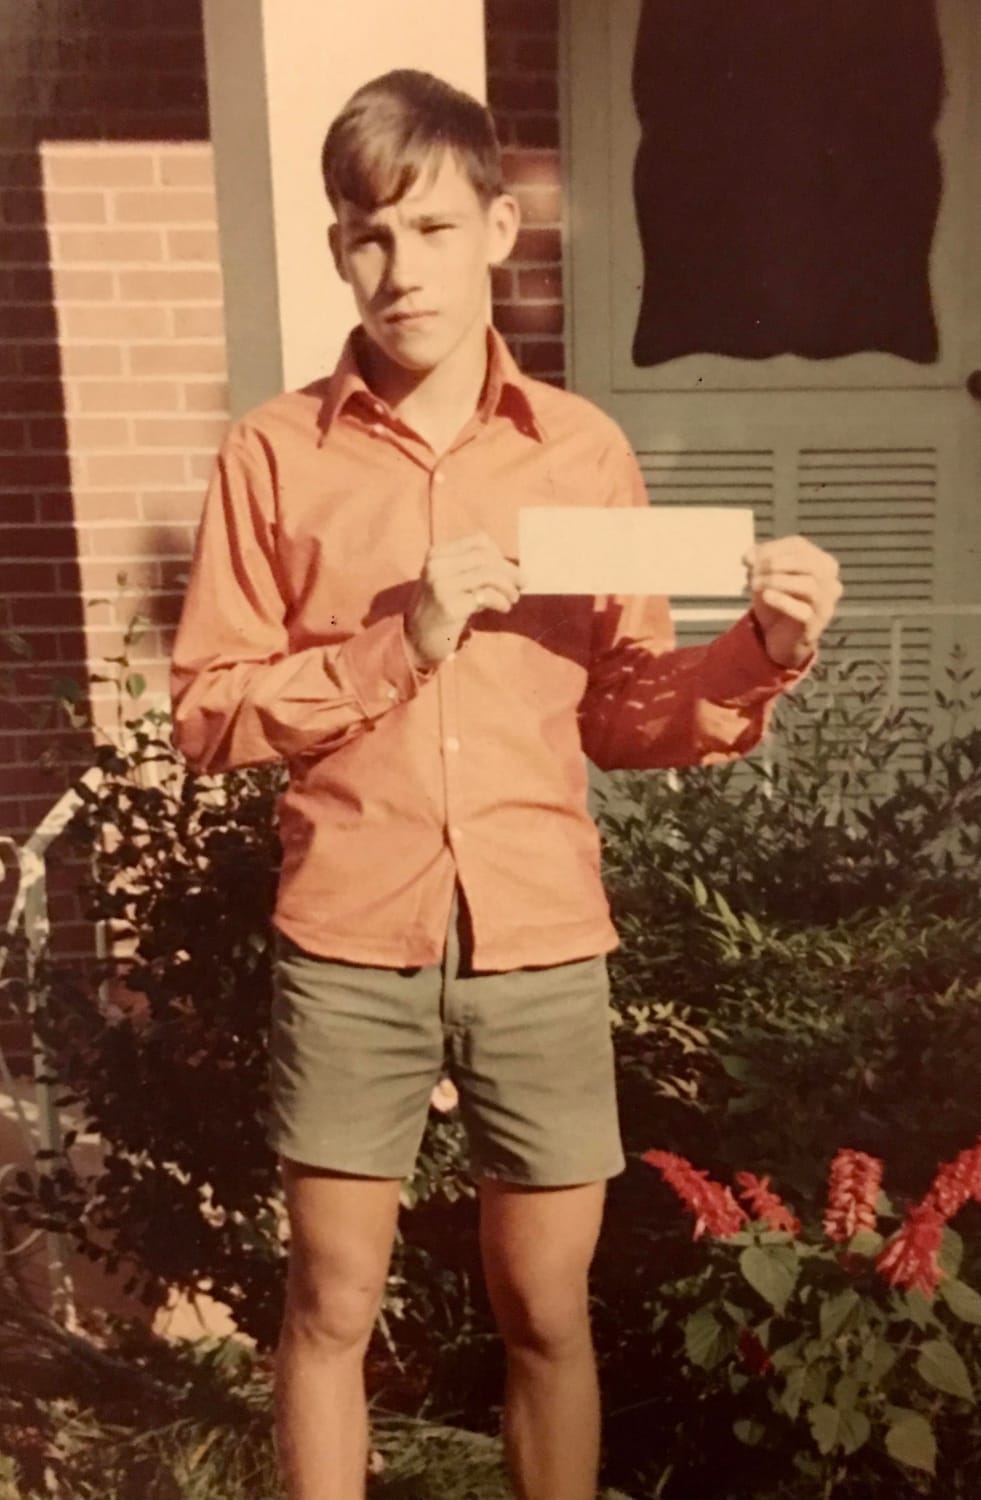 My dad with his first paycheck, 1966, Atlanta